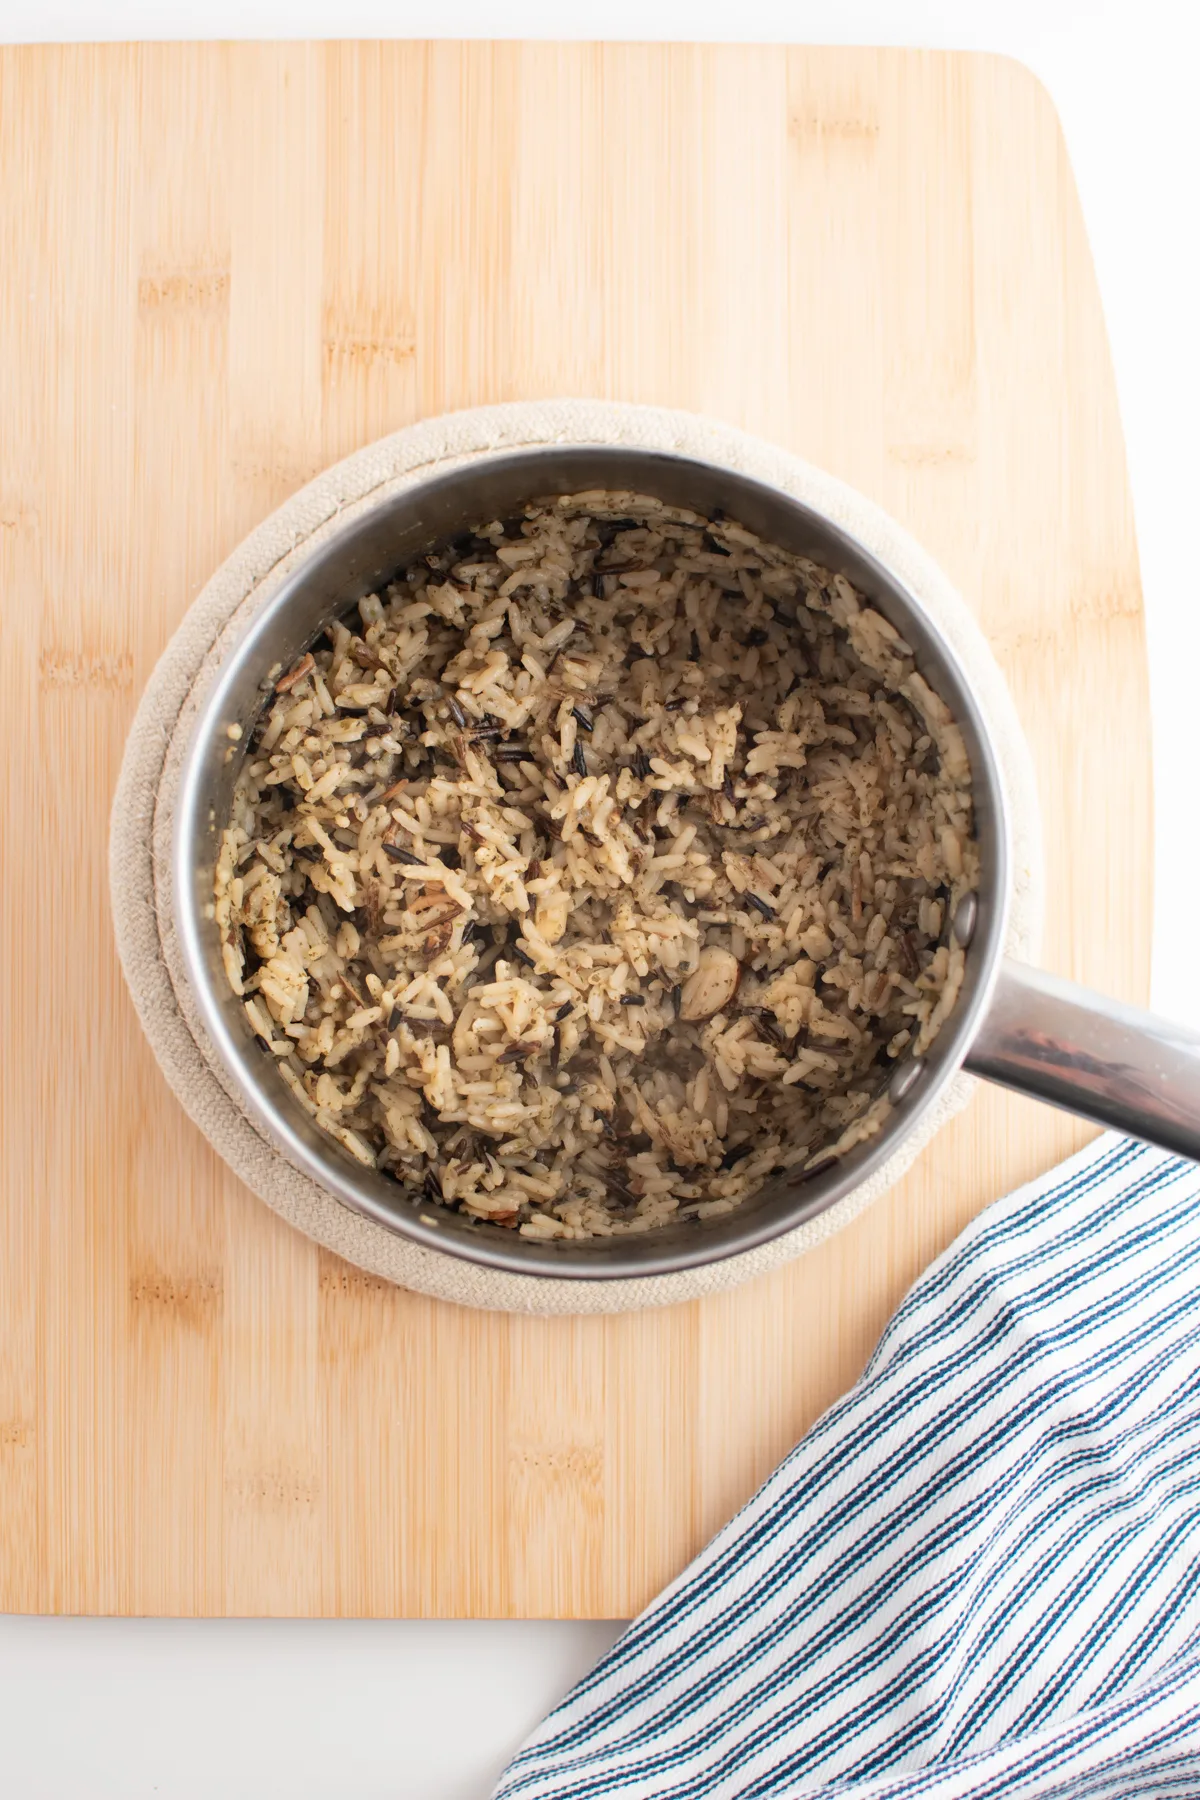 Wild rice in small metal stock pot next to blue and white striped kitchen towel.